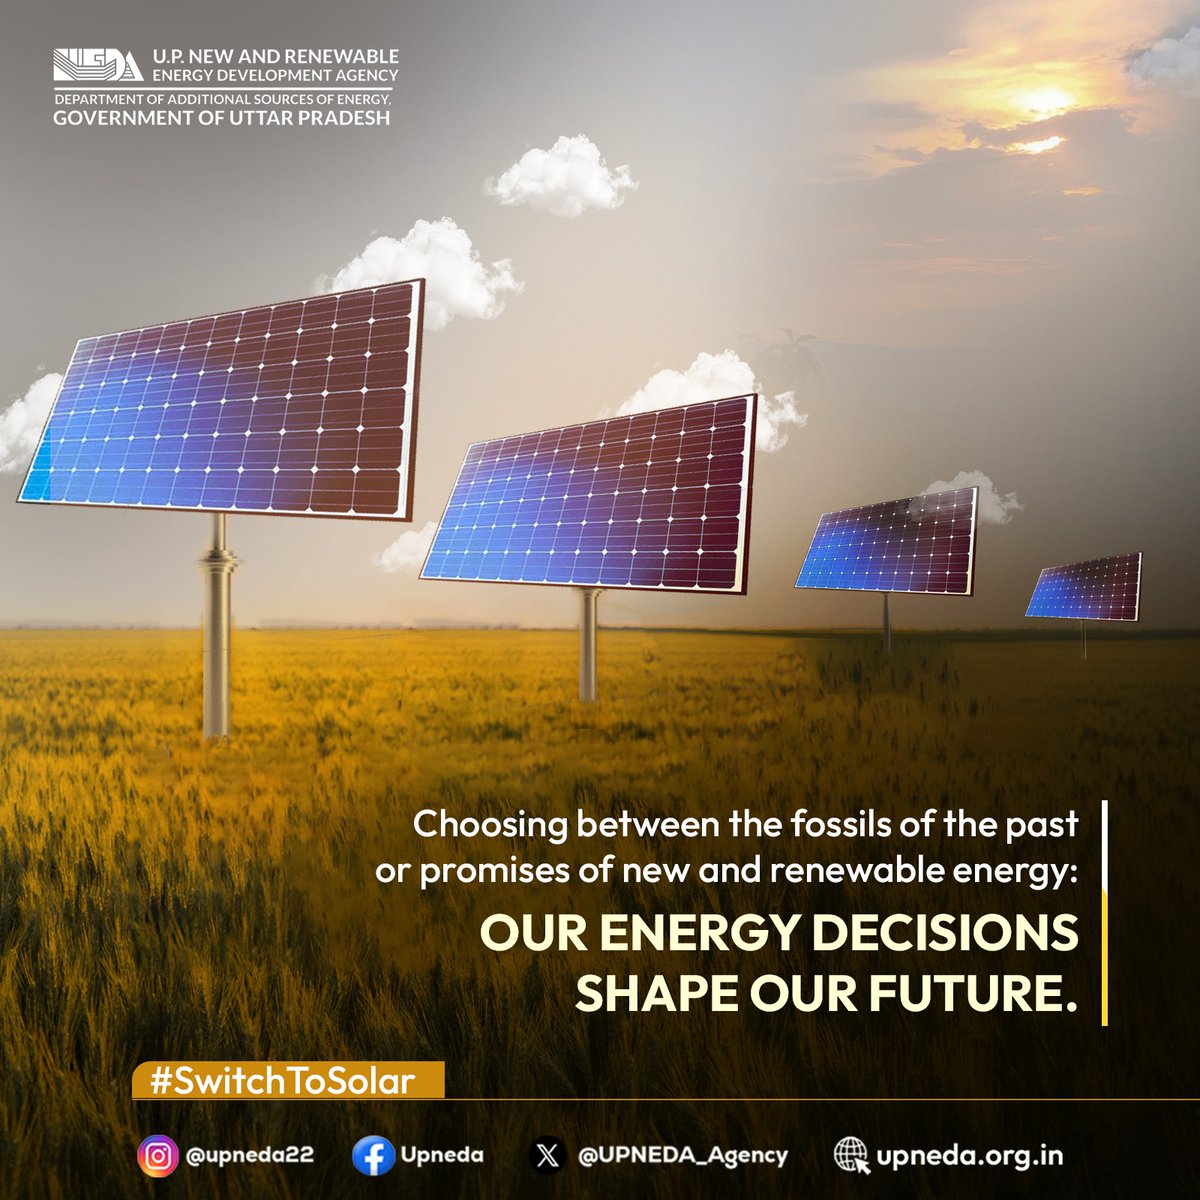 Every energy choice we make is a step towards our future. Let's shape a sustainable future by prioritizing clean, renewable sources.

#solarenergy   #CleanFuture #SolarPlant #RooftopSolar #RenewableEnergy #Upneda 
#upneda_agency
@CMOfficeUP
@aksharmaBharat
@isomendratomar